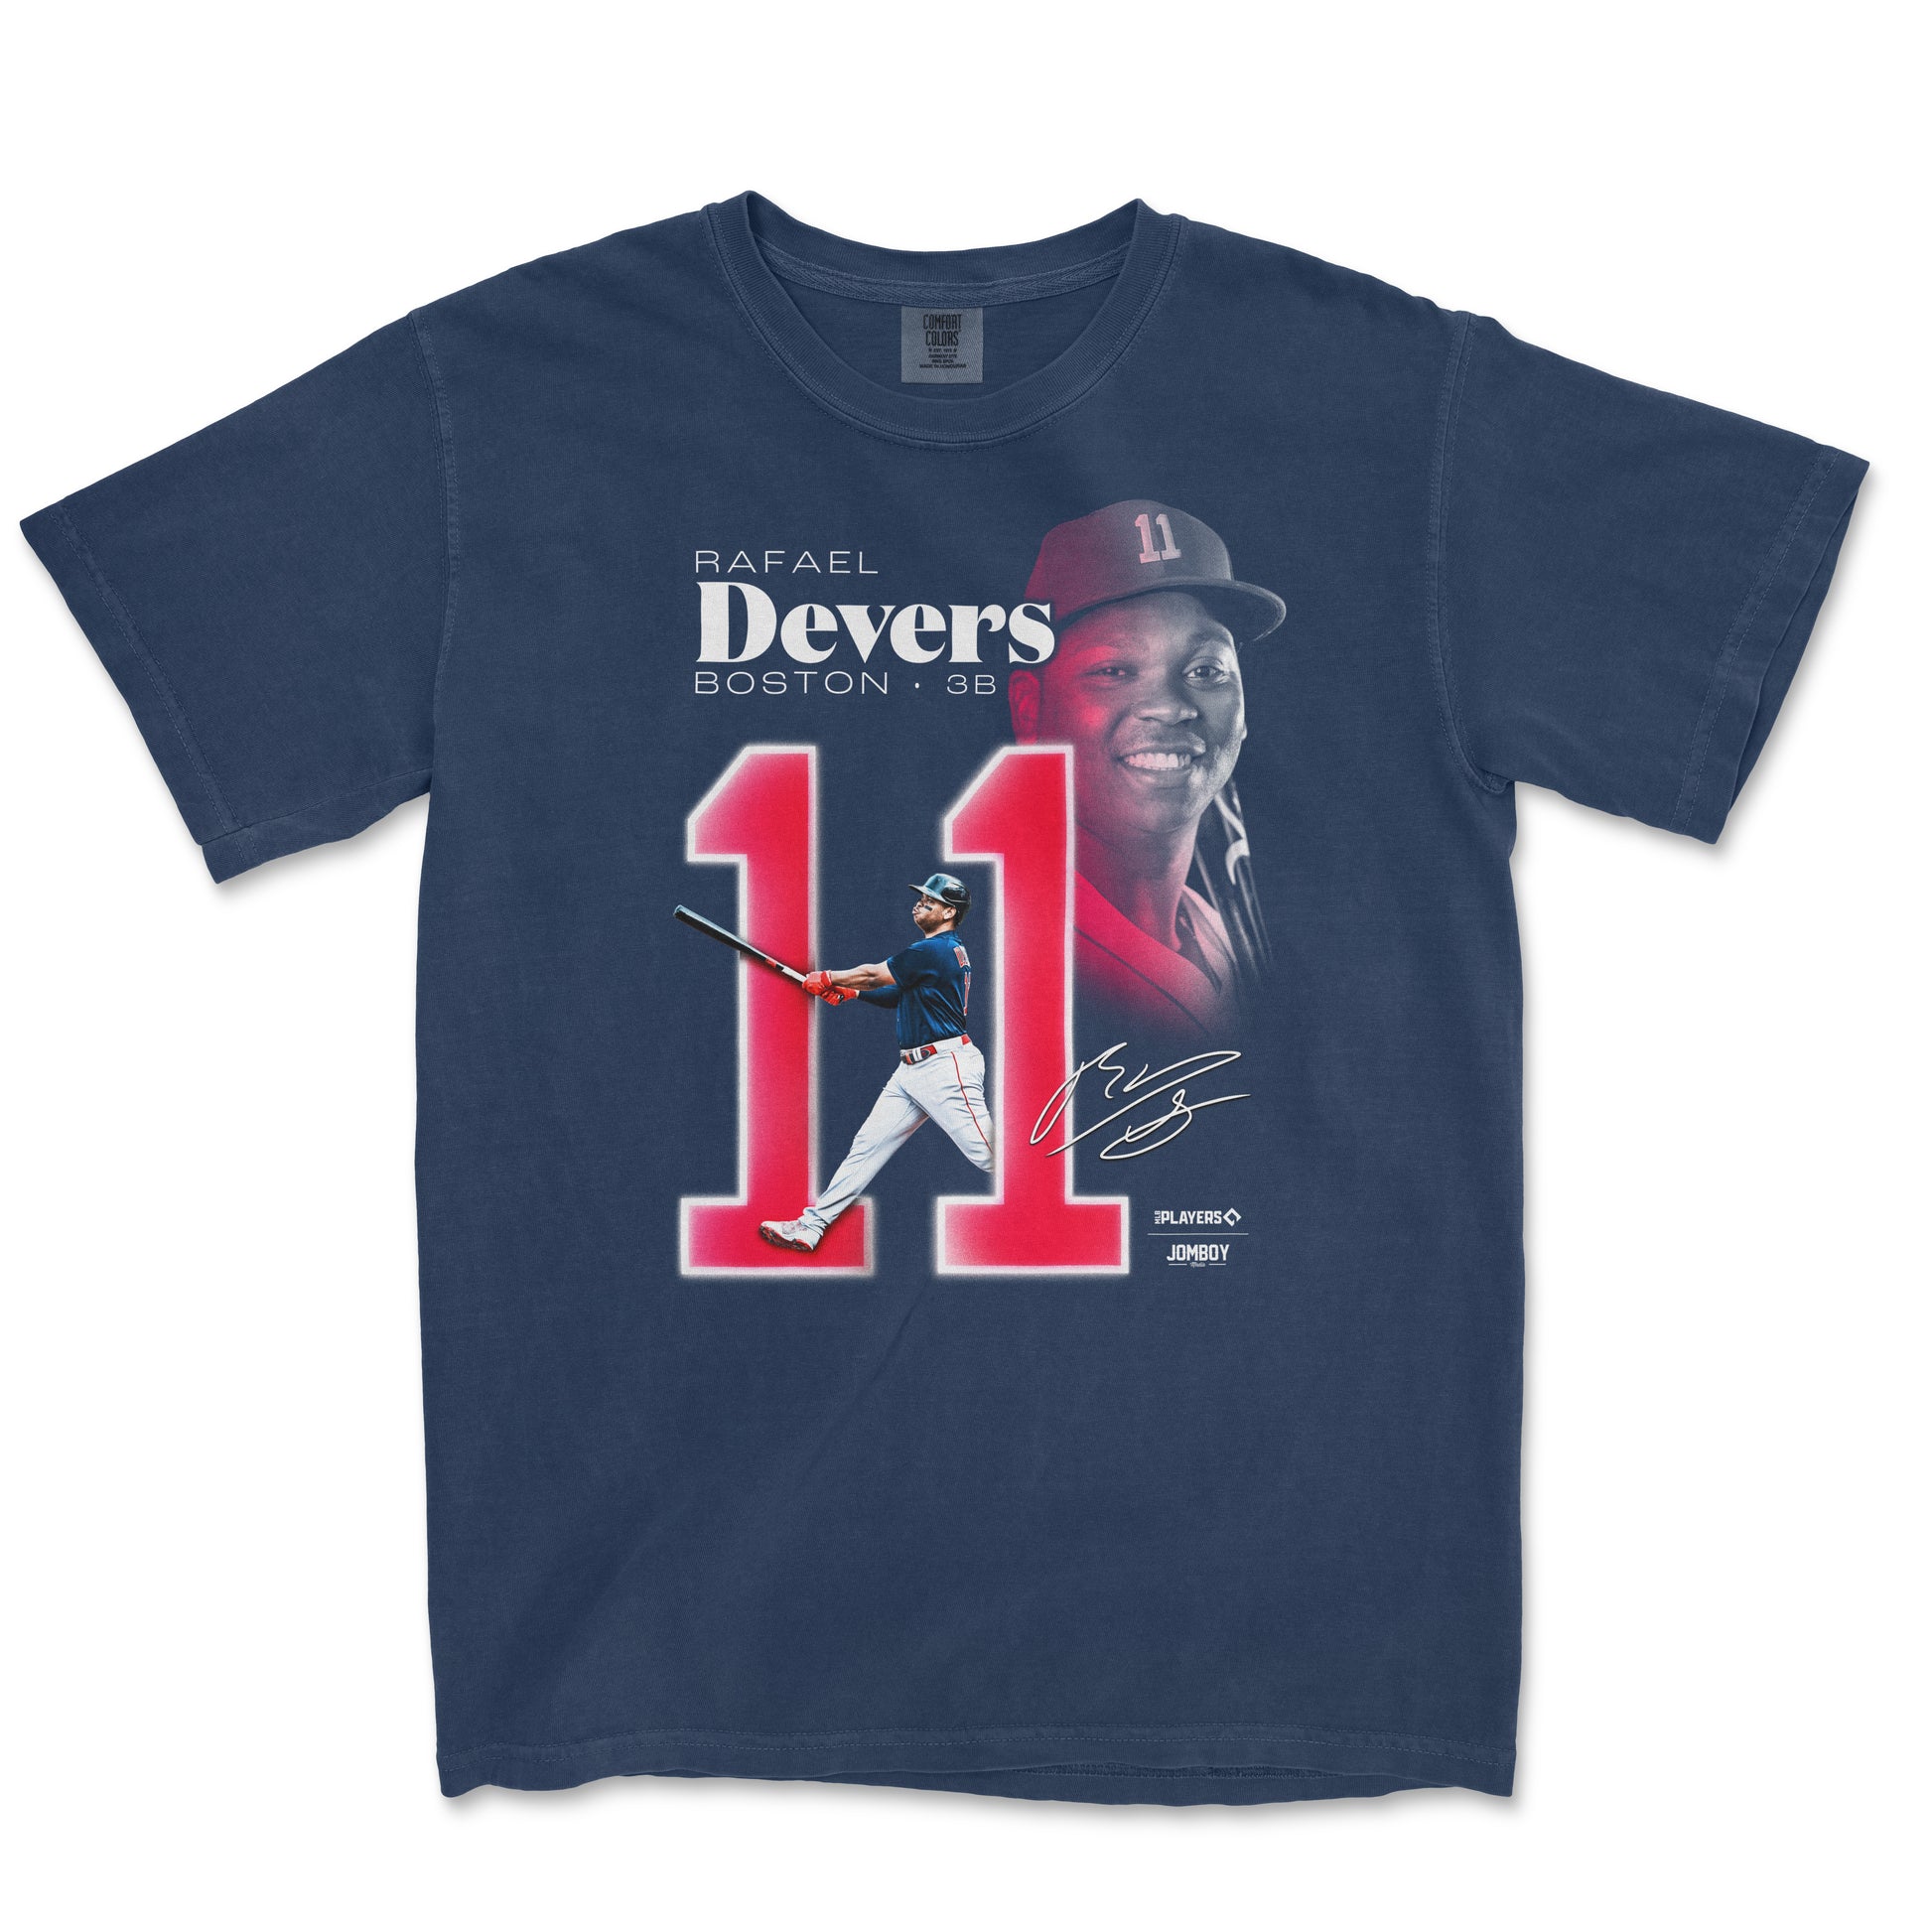 MLB Rafael Devers Signed Jerseys, Collectible Rafael Devers Signed Jerseys